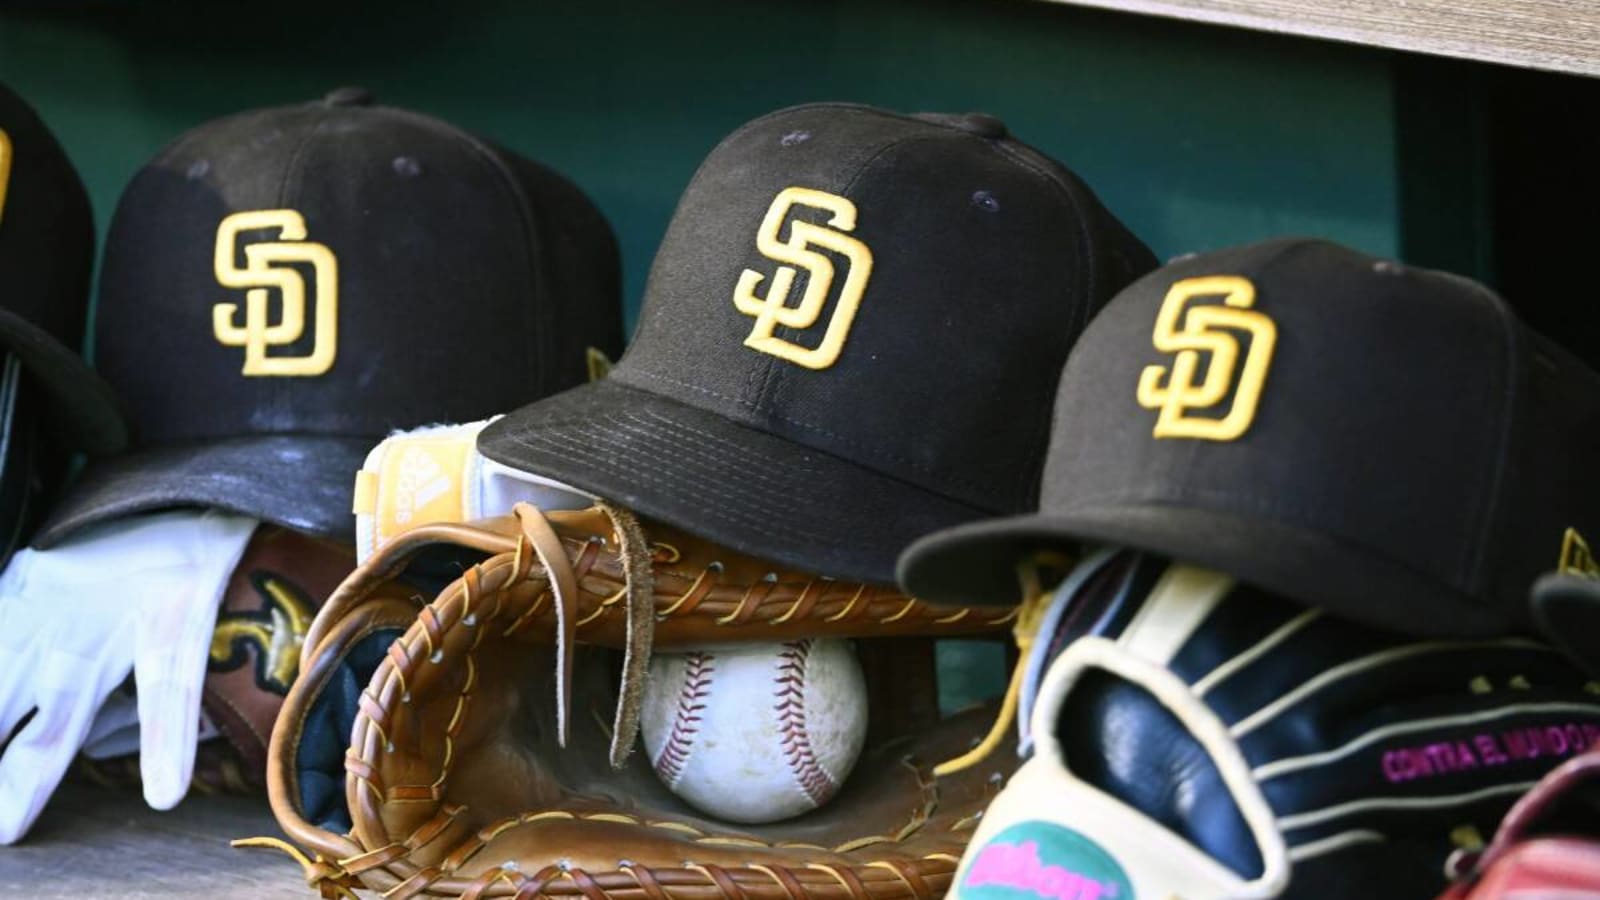 Padres Lead MLB With 6 Top-100 Prospects, Per Baseball America